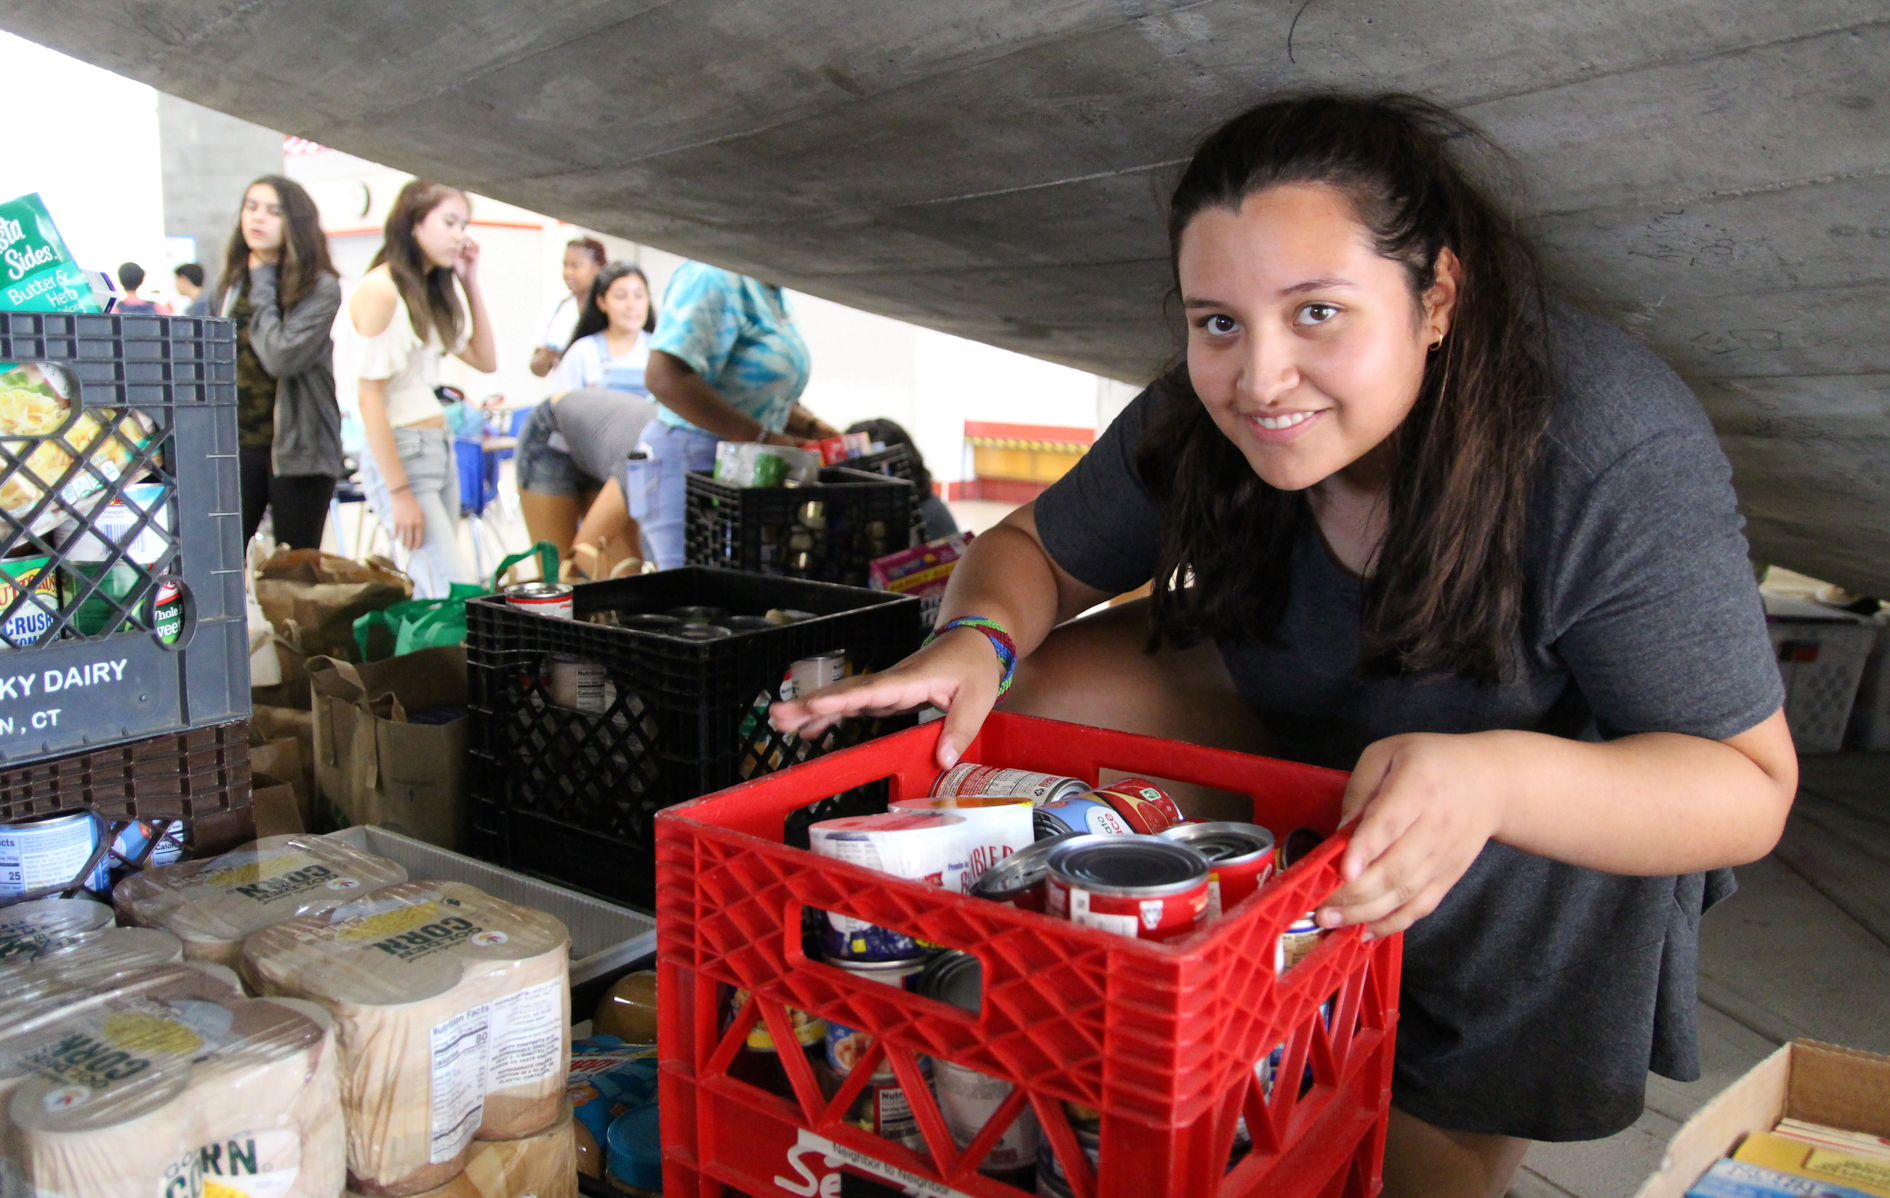 GHS students participated in the ninth annual September 11th National Day of Service and Remembrance by aiding those less fortunate in the Greenwich community. Sept 11, 2019 Photo: Leslie Yager